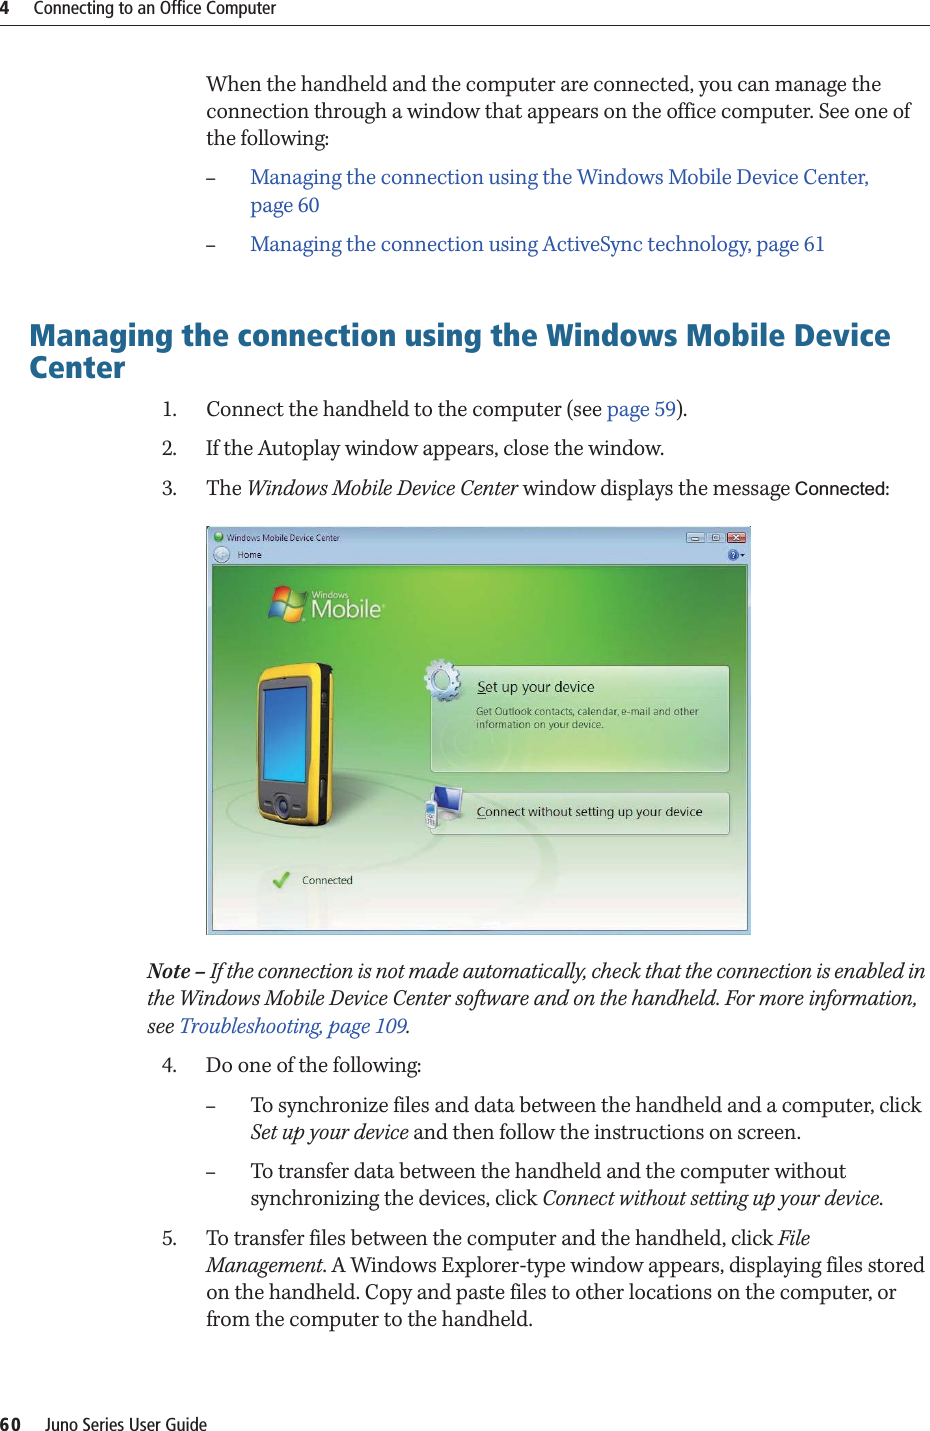 4     Connecting to an Office Computer60     Juno Series User GuideWhen the handheld and the computer are connected, you can manage the connection through a window that appears on the office computer. See one of the following: –Managing the connection using the Windows Mobile Device Center, page 60–Managing the connection using ActiveSync technology, page 61Managing the connection using the Windows Mobile Device Center1. Connect the handheld to the computer (see page 59). 2. If the Autoplay window appears, close the window.  3. The Windows Mobile Device Center window displays the message Connected:  Note – If the connection is not made automatically, check that the connection is enabled in the Windows Mobile Device Center software and on the handheld. For more information, see Troubleshooting, page 109.4. Do one of the following:–To synchronize files and data between the handheld and a computer, click Set up your device and then follow the instructions on screen. –To transfer data between the handheld and the computer without synchronizing the devices, click Connect without setting up your device.5. To transfer files between the computer and the handheld, click File Management. A Windows Explorer-type window appears, displaying files stored on the handheld. Copy and paste files to other locations on the computer, or from the computer to the handheld.